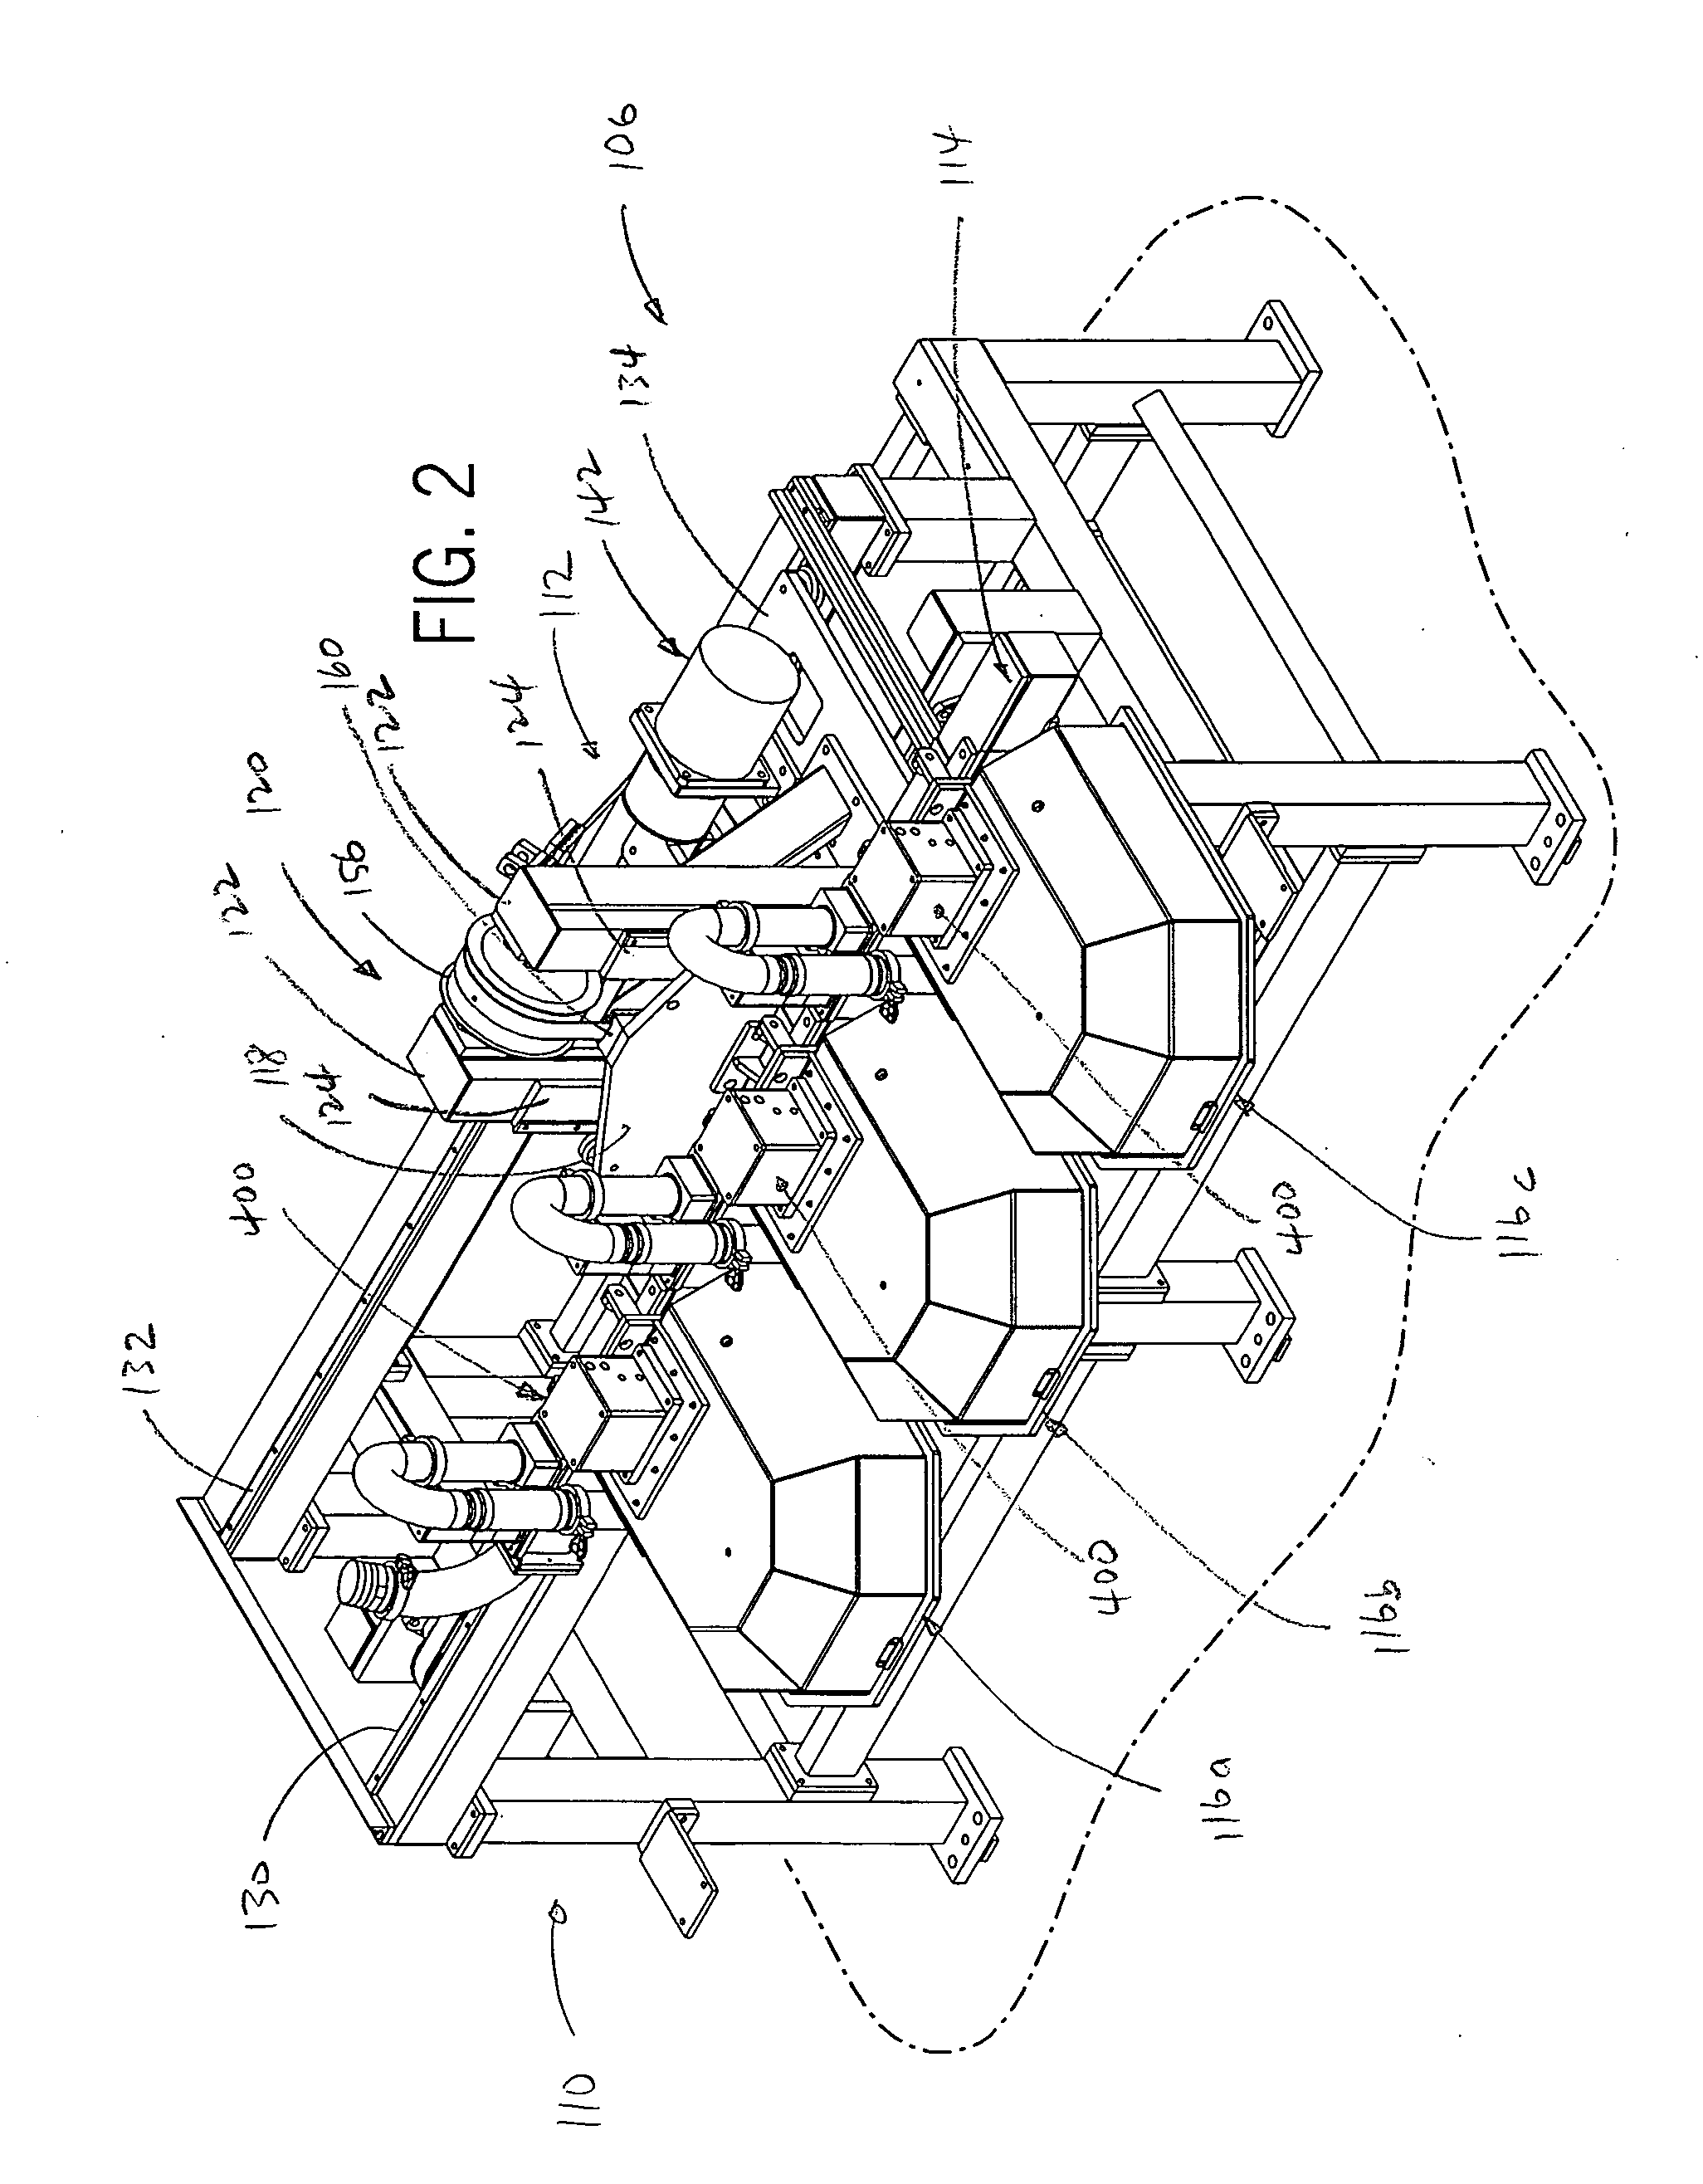 Combination vacuum manifold and support beam for a vacuum packaging system